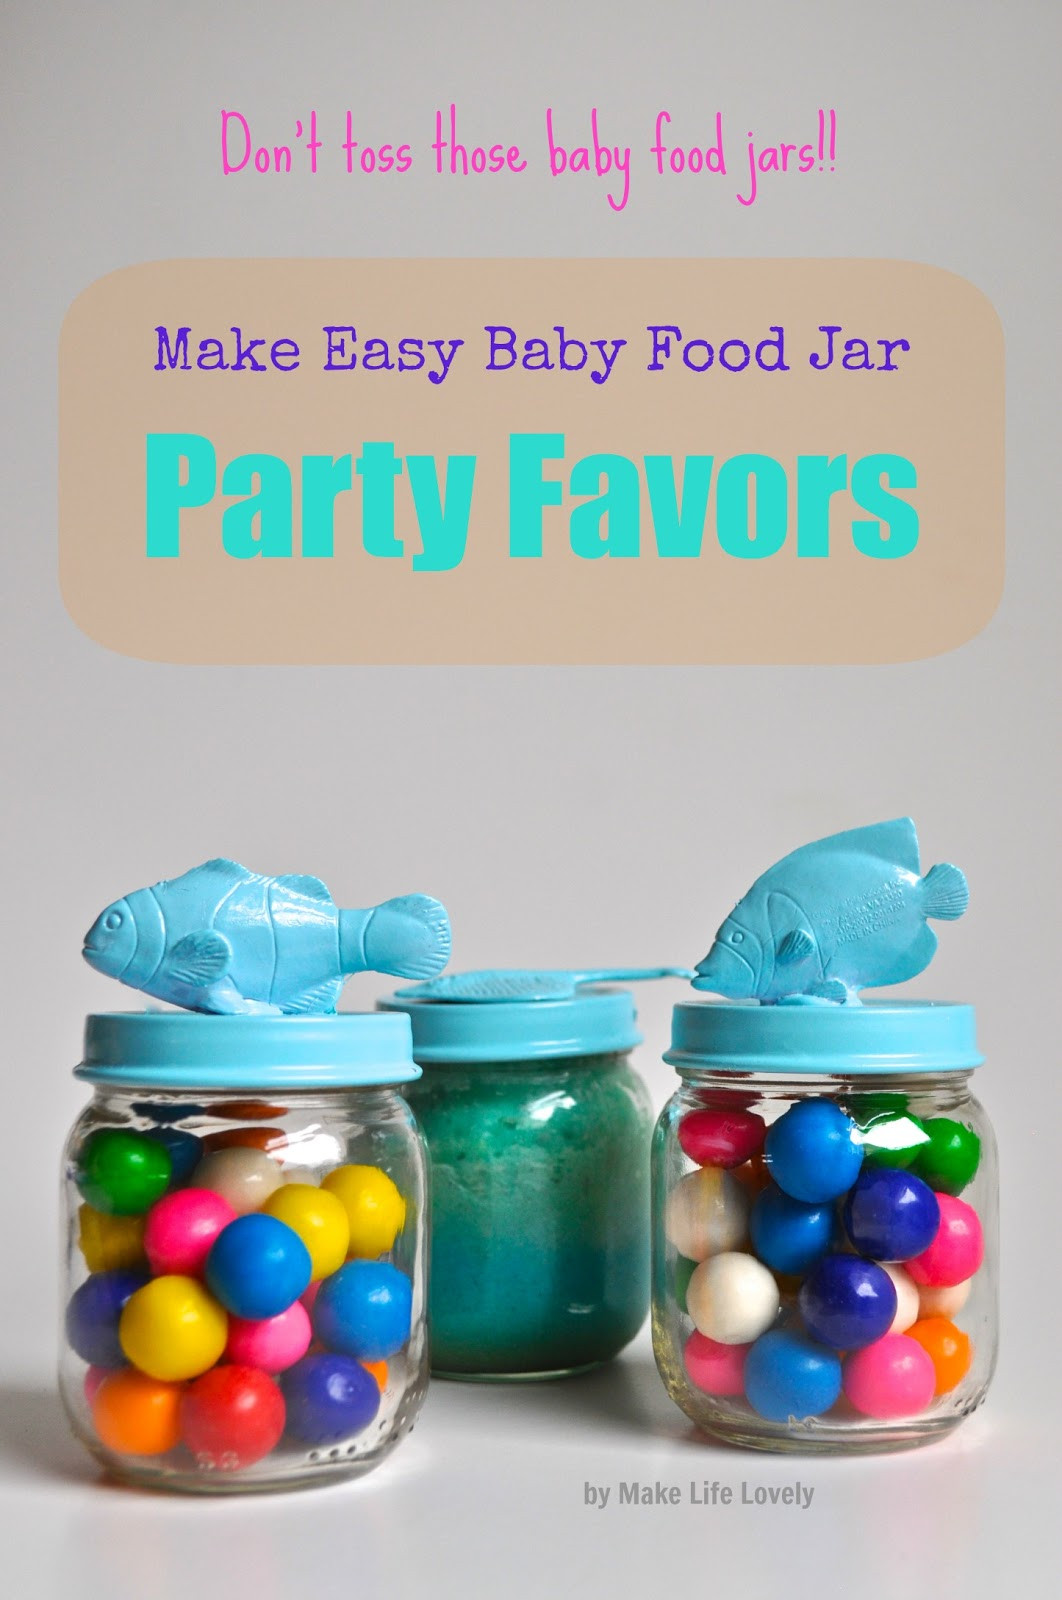 Baby Food Jars Party Favors
 Upcycled Baby Food Jars Baby Food Jar Party Favors Make